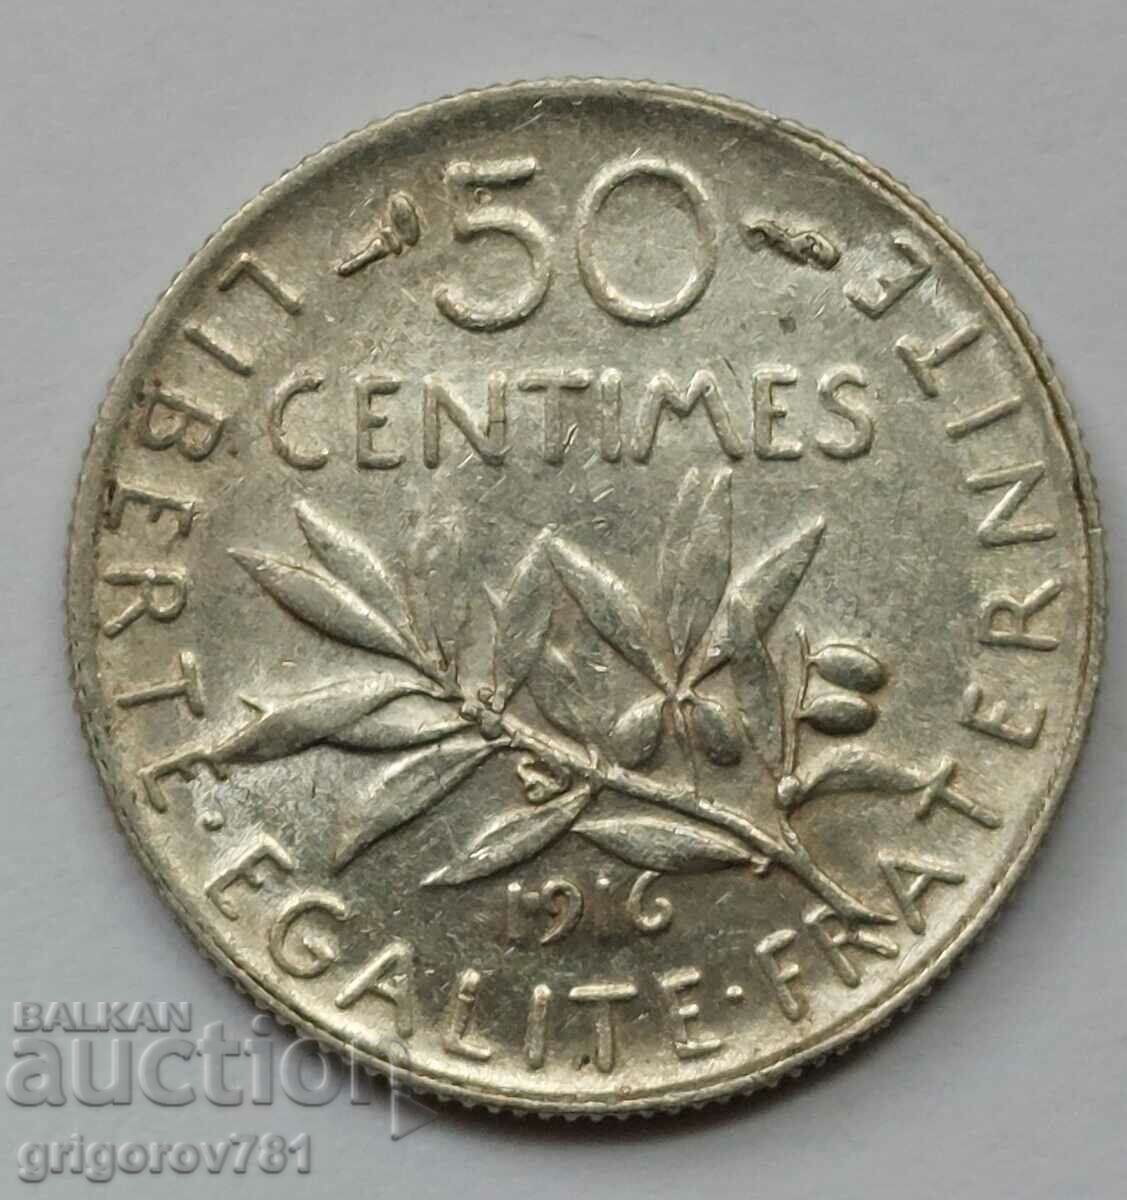 50 centimes silver France 1916 - silver coin #71